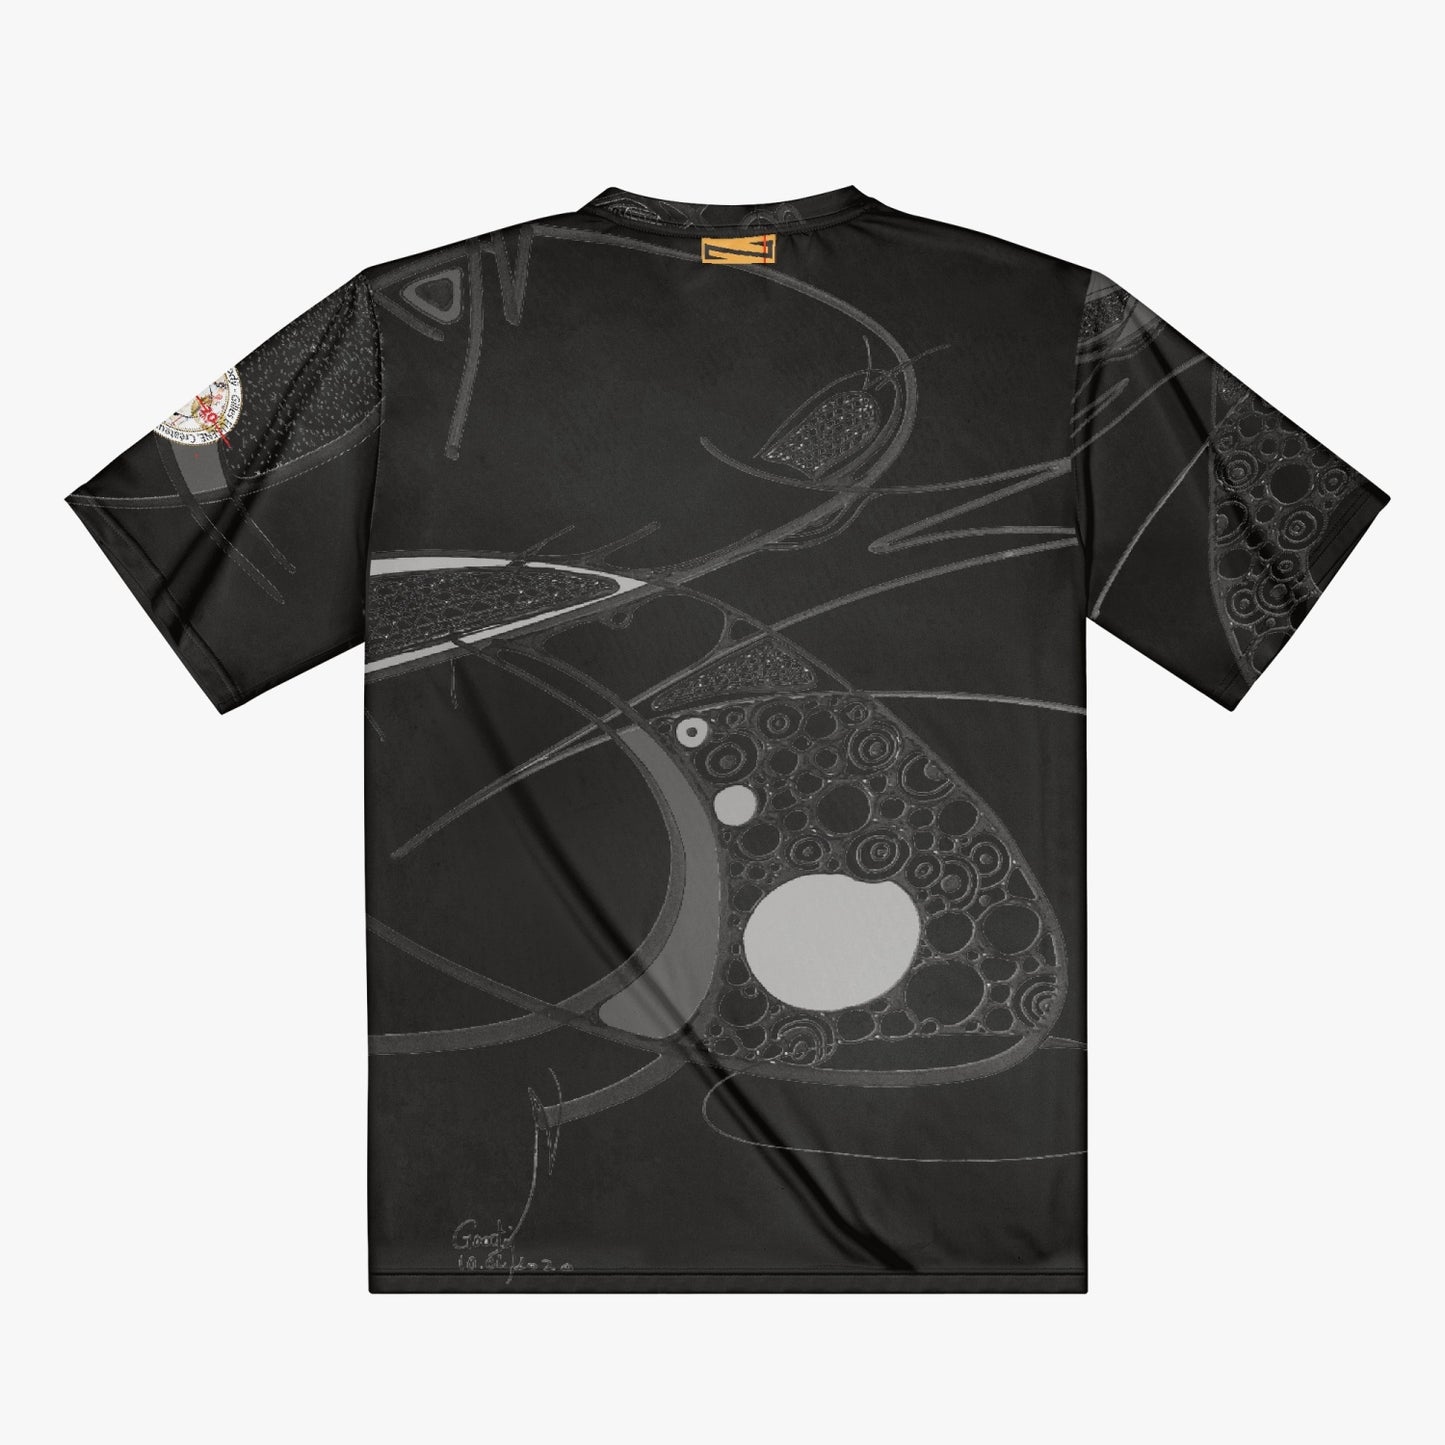 All-over "Blacone" t-shirt